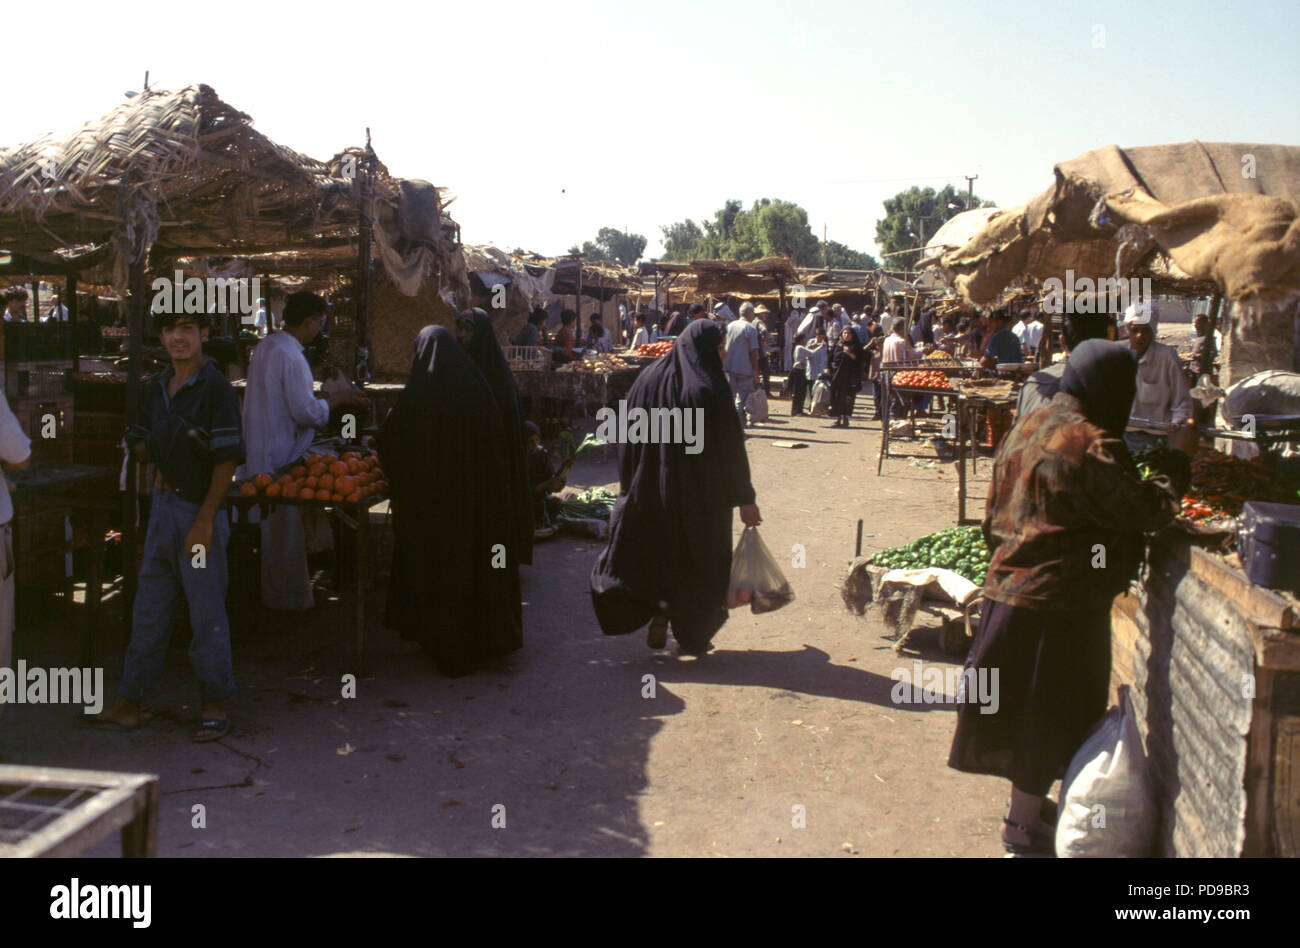 Baghdad, Iraq - October 1995 - A fruit and vegetable market in central Baghdad.  Iraqi's struggling due to the strict UN sanctions imposed during the 1990s because of Iraq's invasion of Kuwait in 1990. Stock Photo